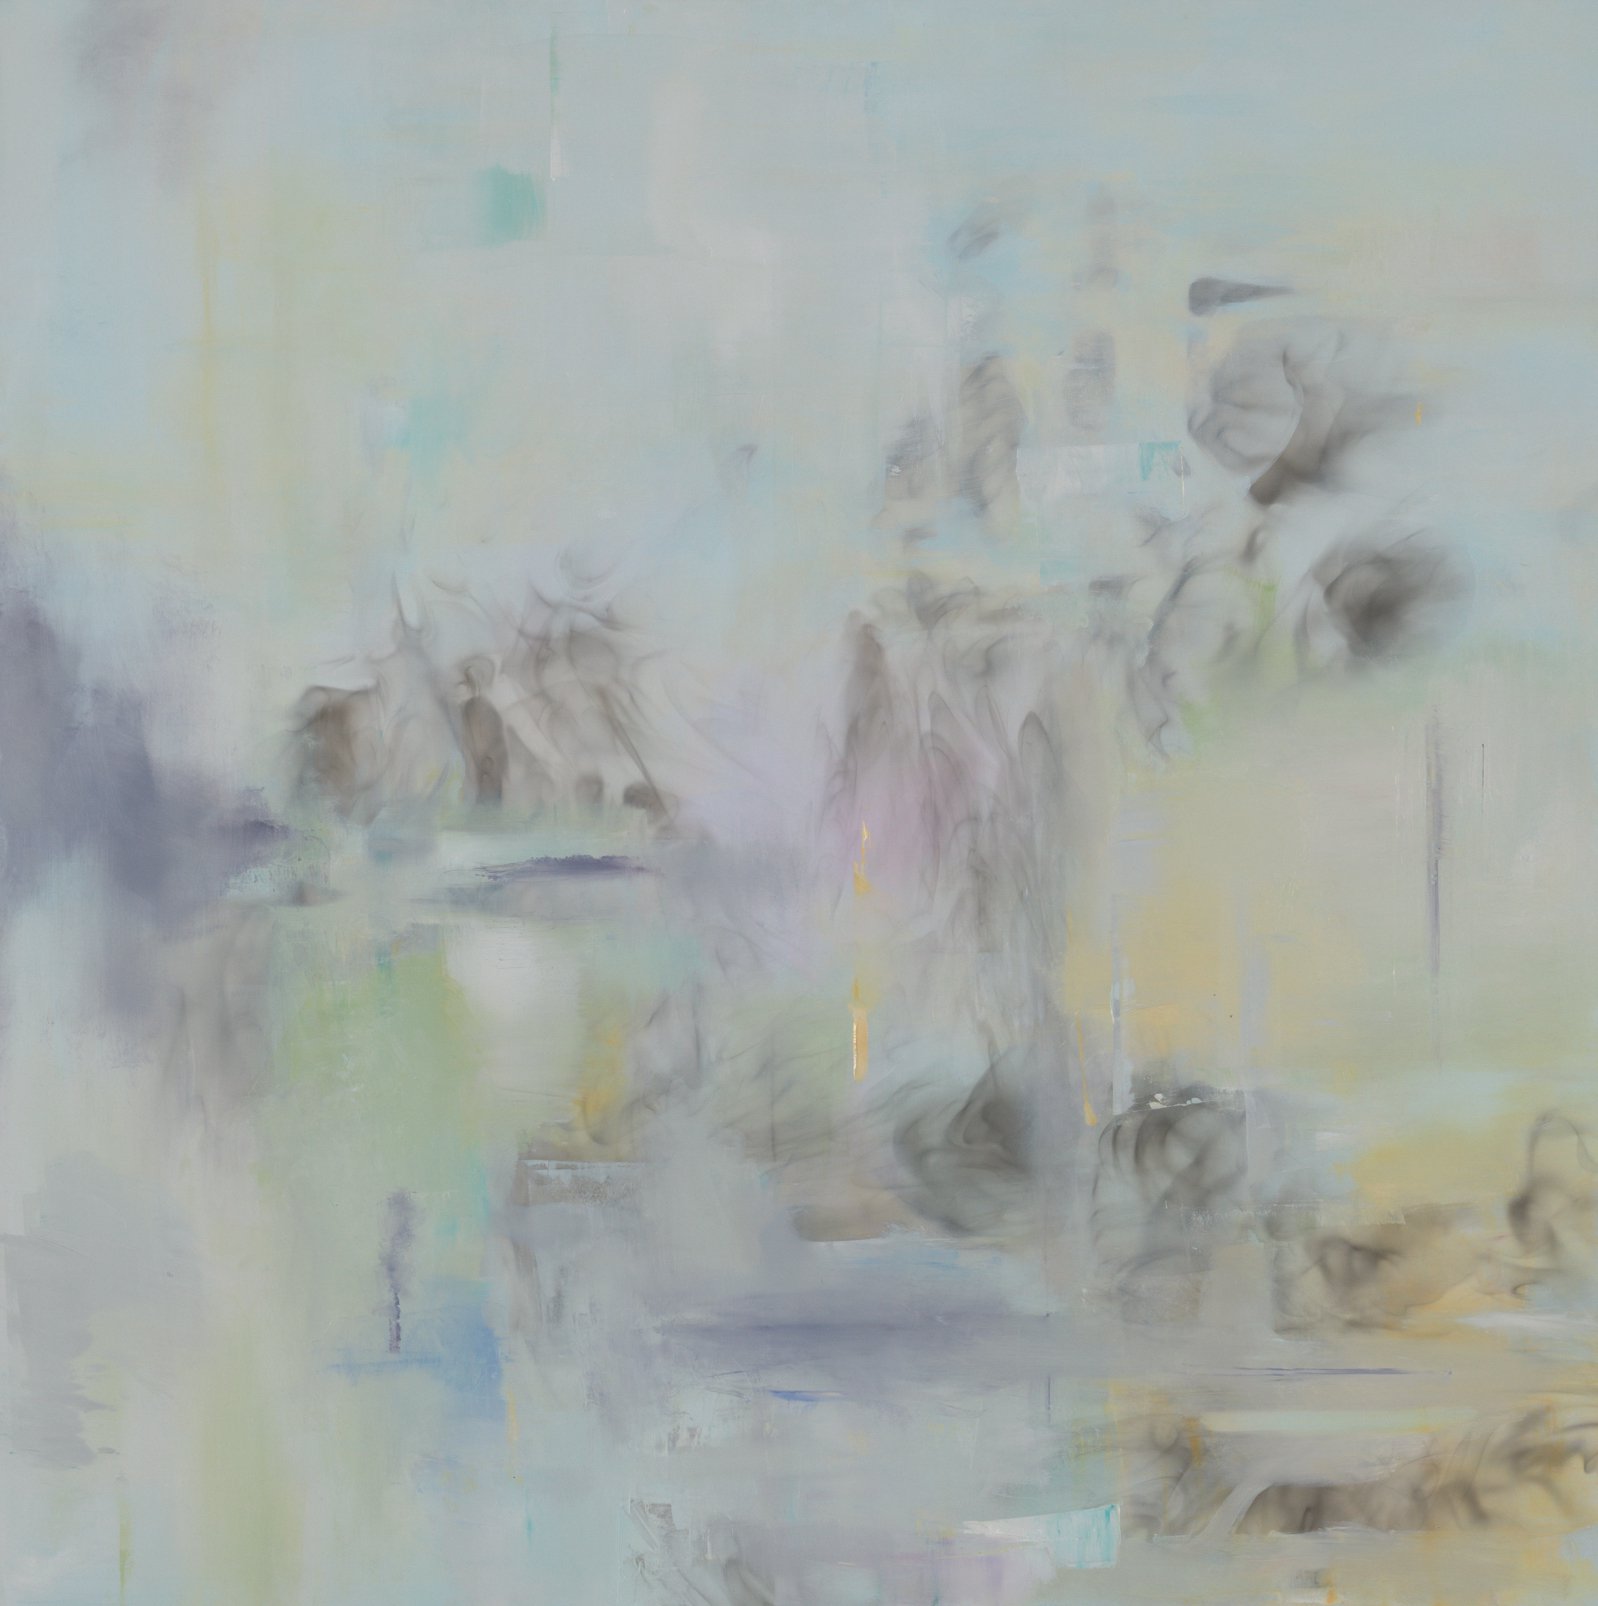 Eftihis Patsourakis, Untitled, oil, acrylic and smoke on canvas, 118 x 118 x 4 cm (46 1/2 x 46 1/2 x 1 5/8 in), 2022